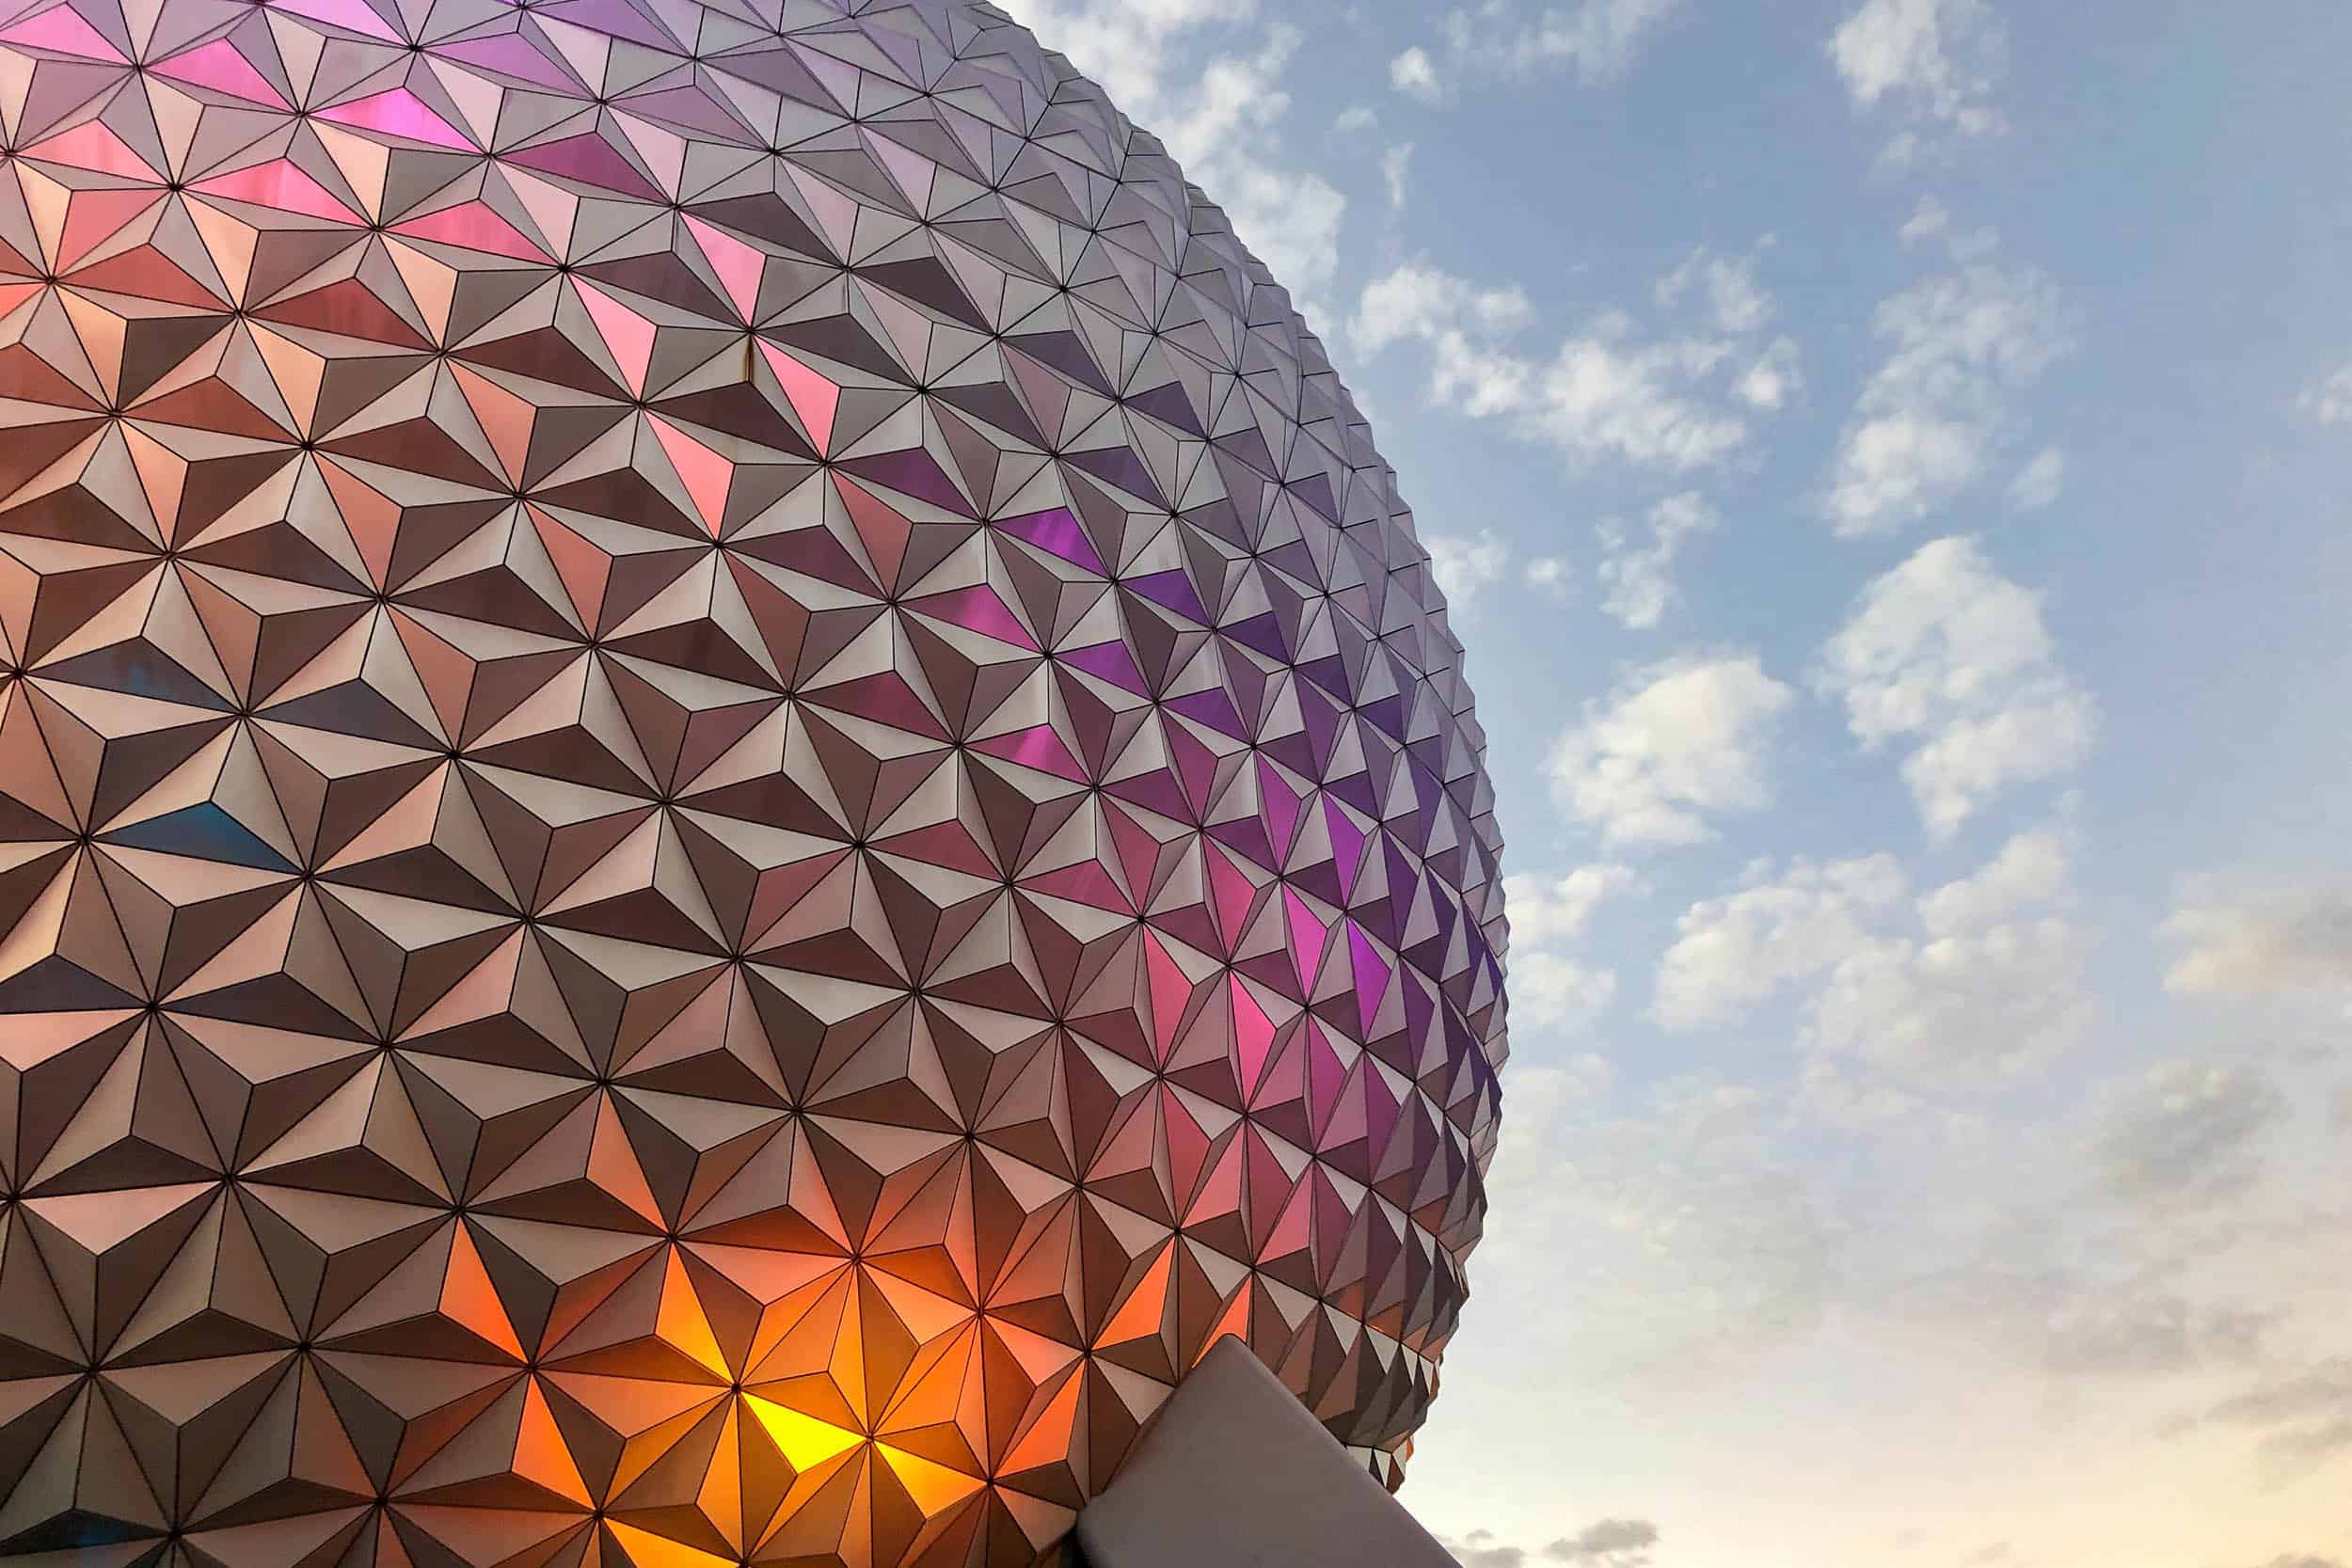 Seeing the iconic Epcot dome at night is one of the best things to do at Epcot in Disney World, Orlando